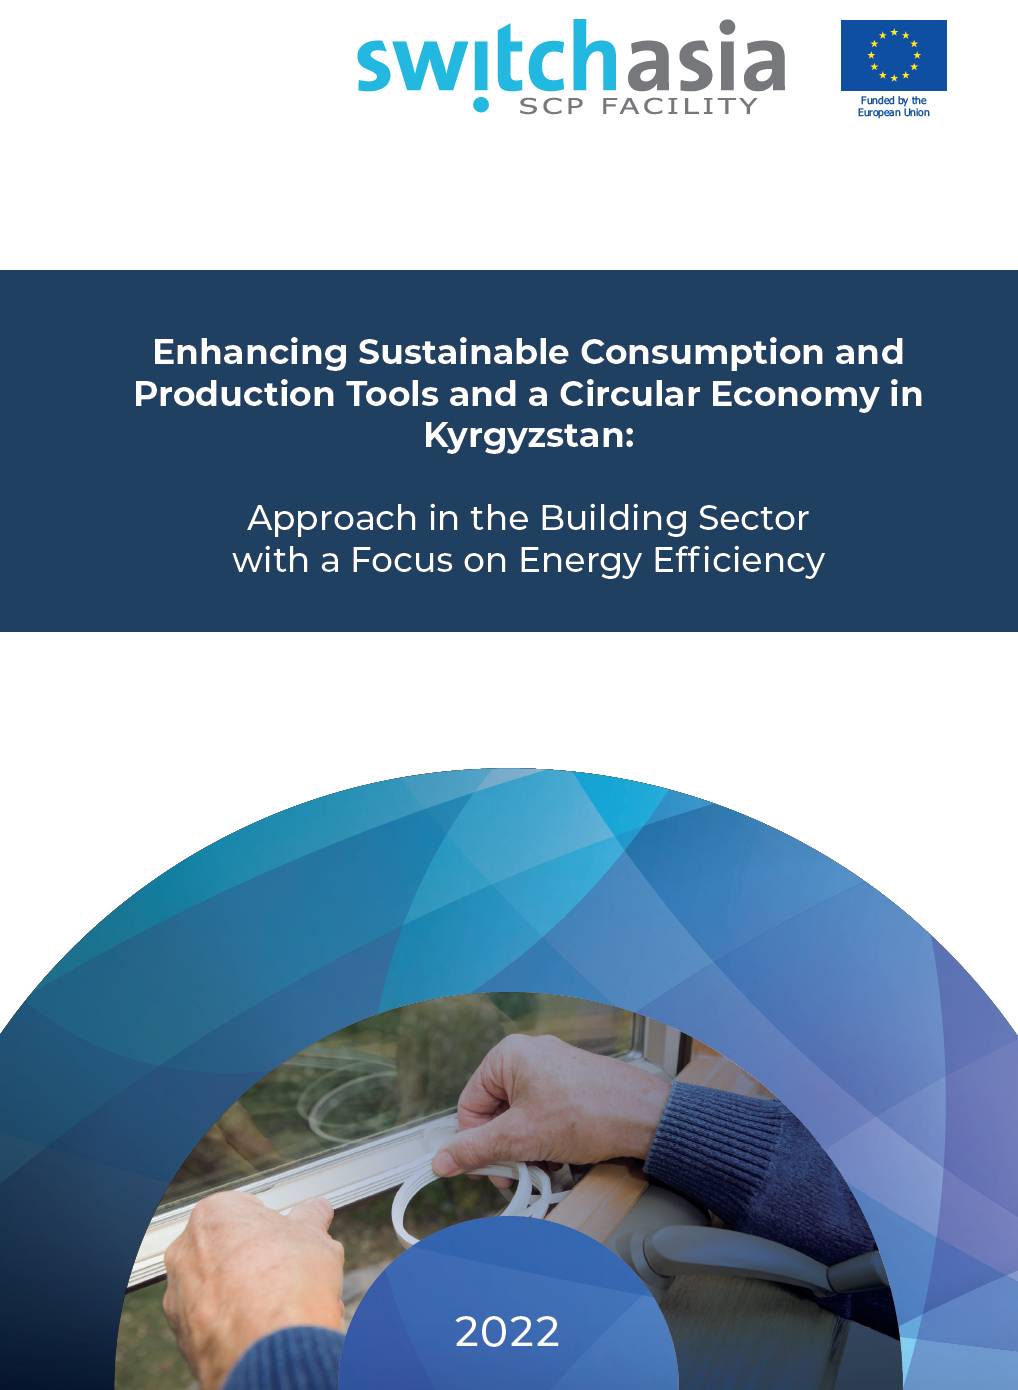 Enhancing Sustainable Consumption and Production Tools and a Circular Economy in Kyrgyzstan